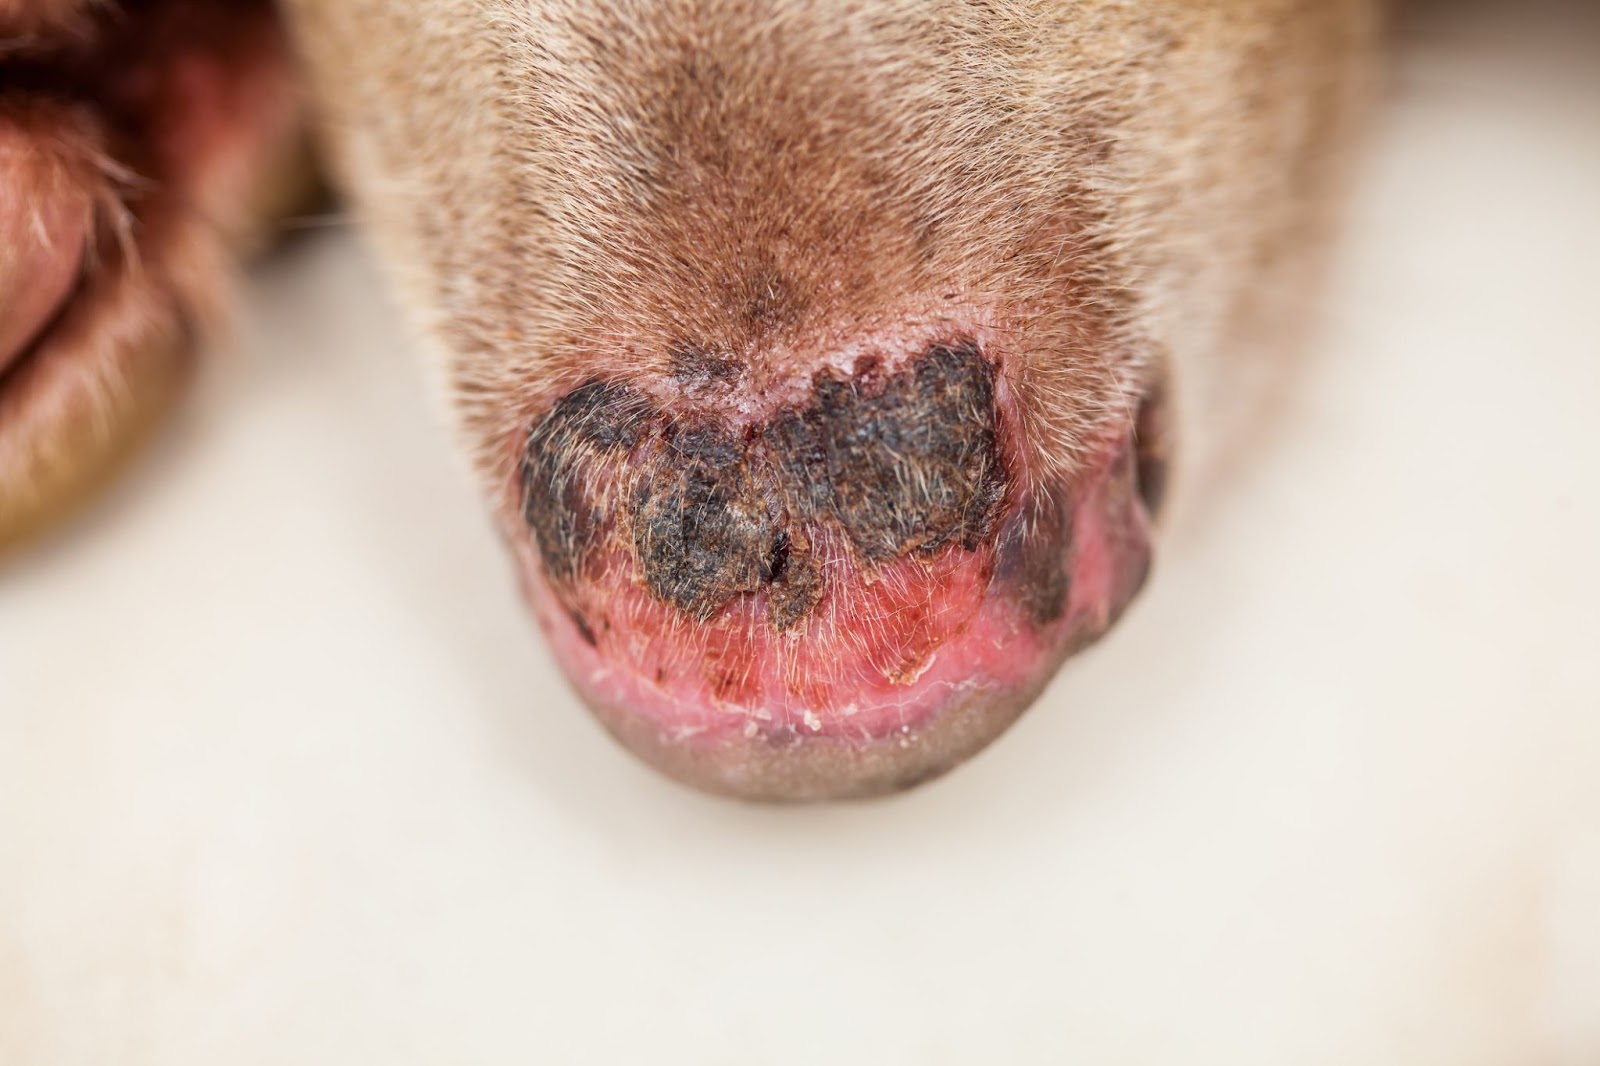 A dog with severe sunburn on their nose often goes together with a dry dog nose